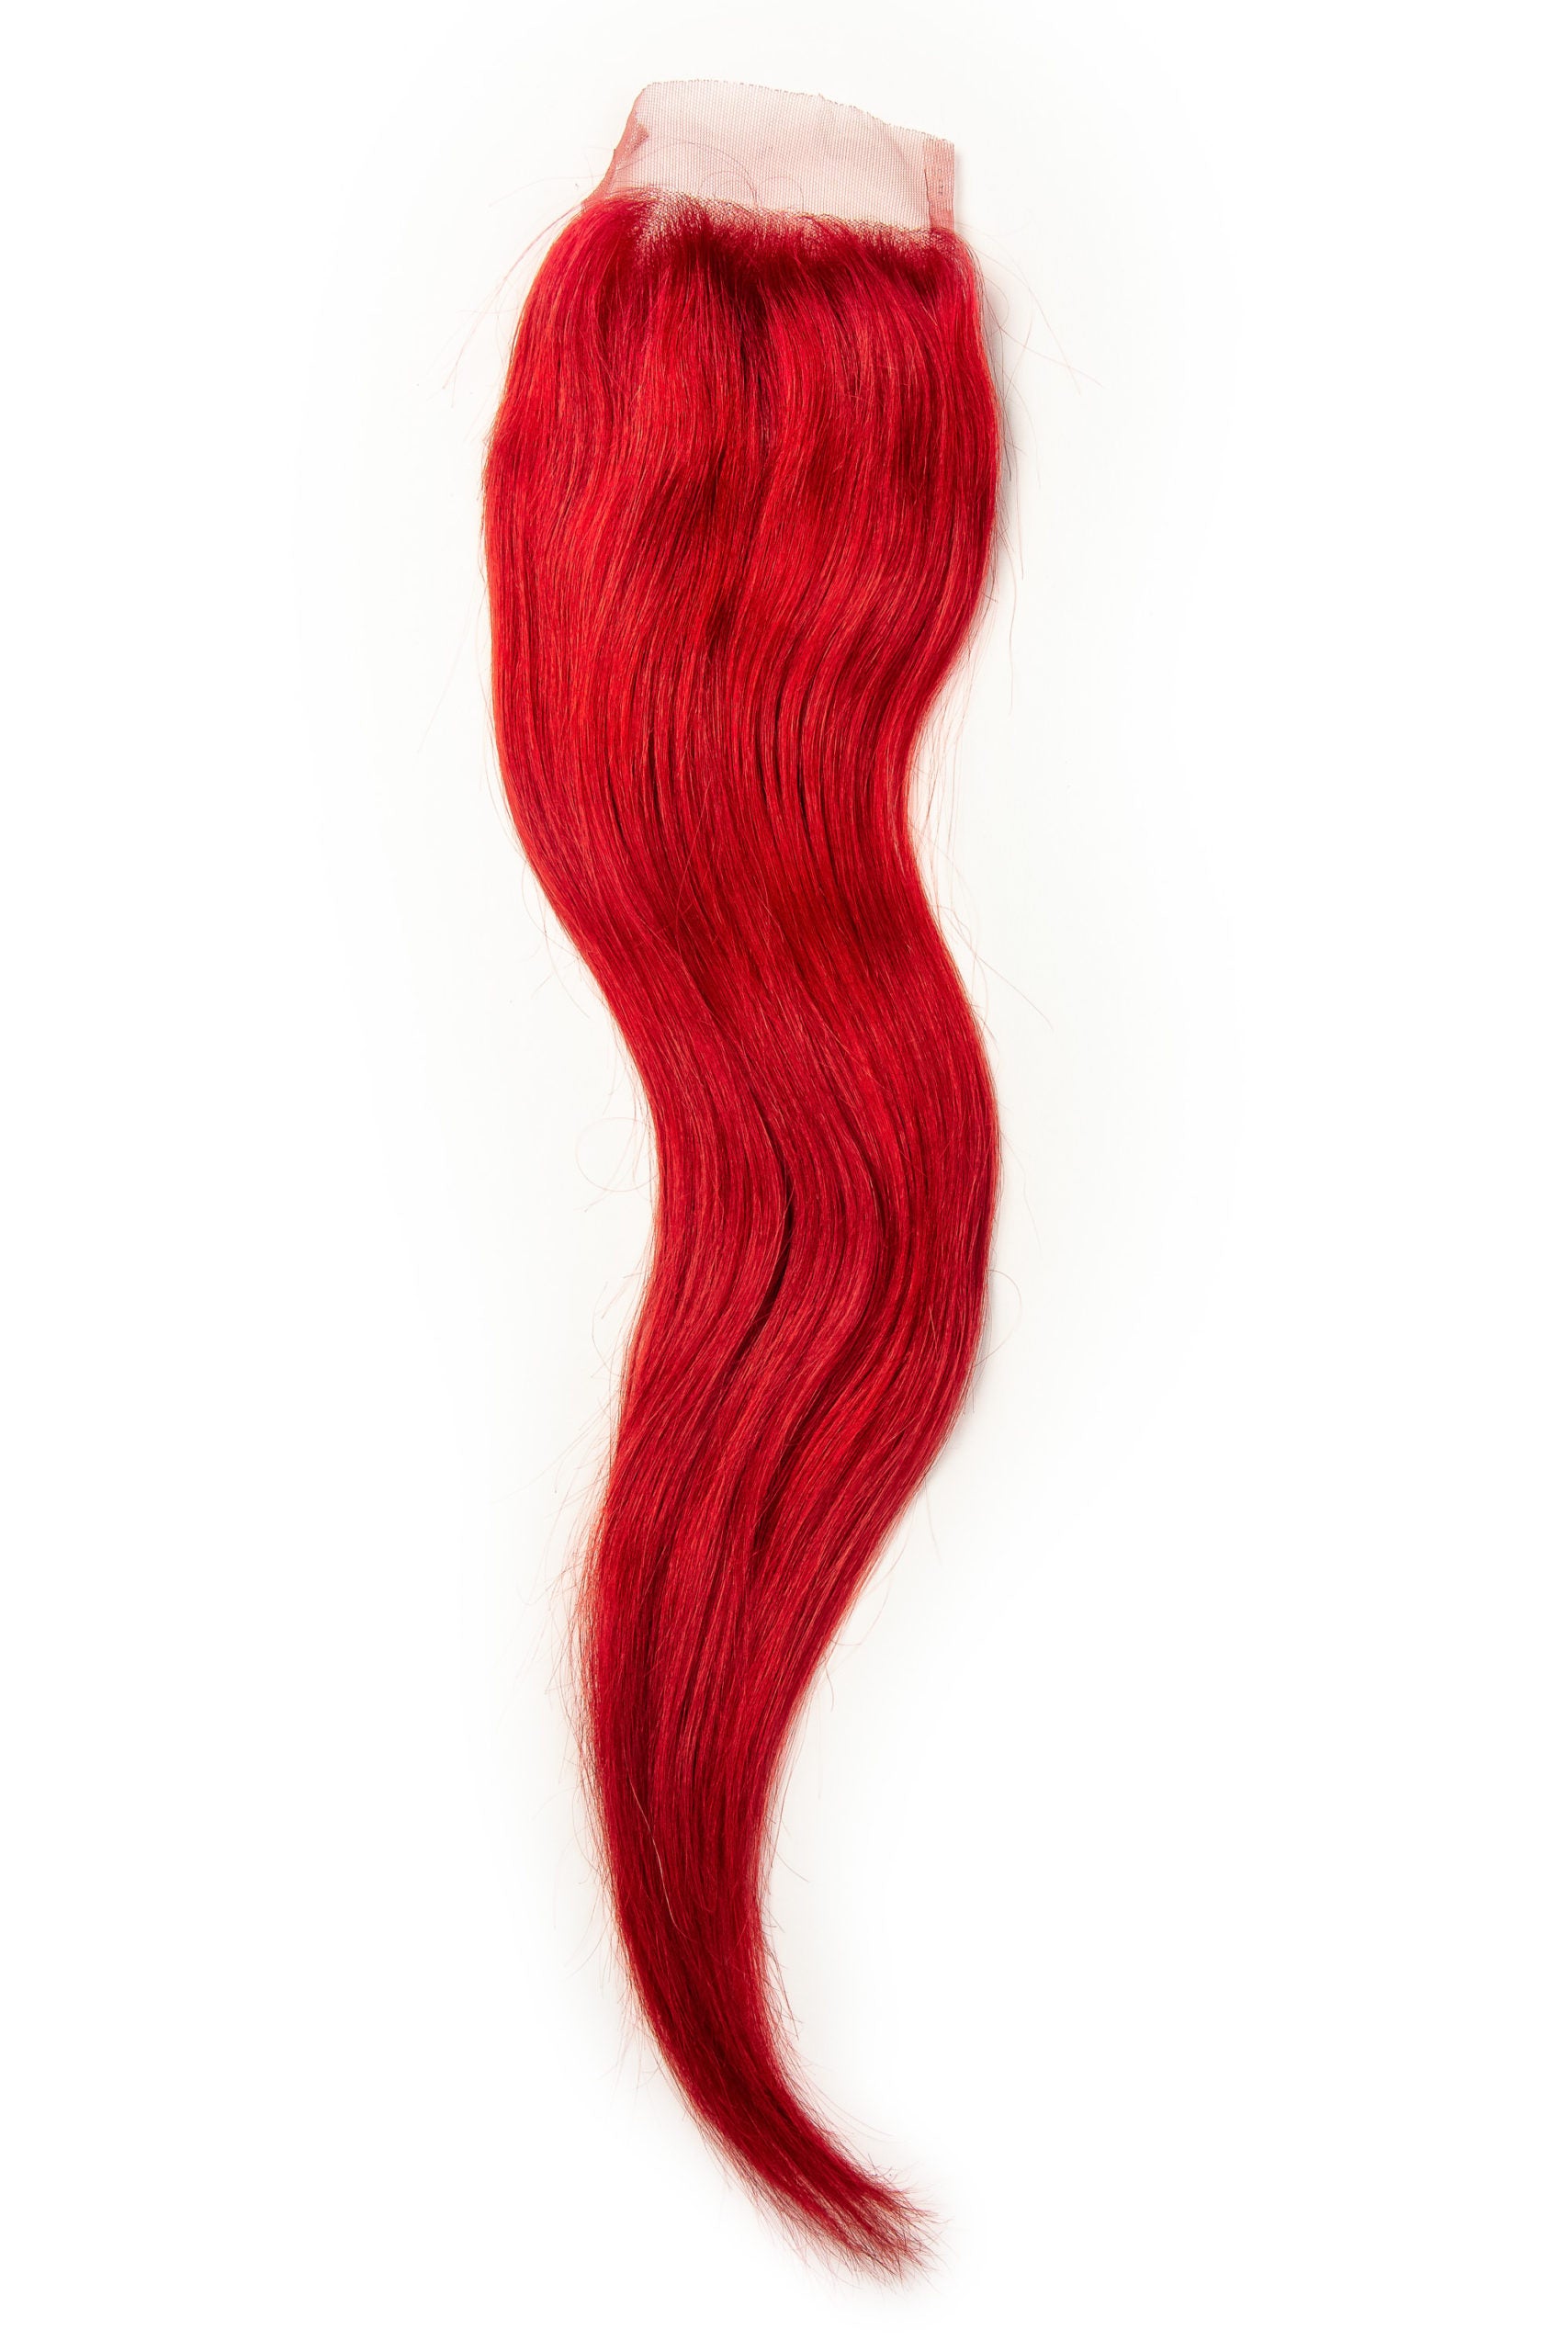 Swiss Lace Red Closure 4x4